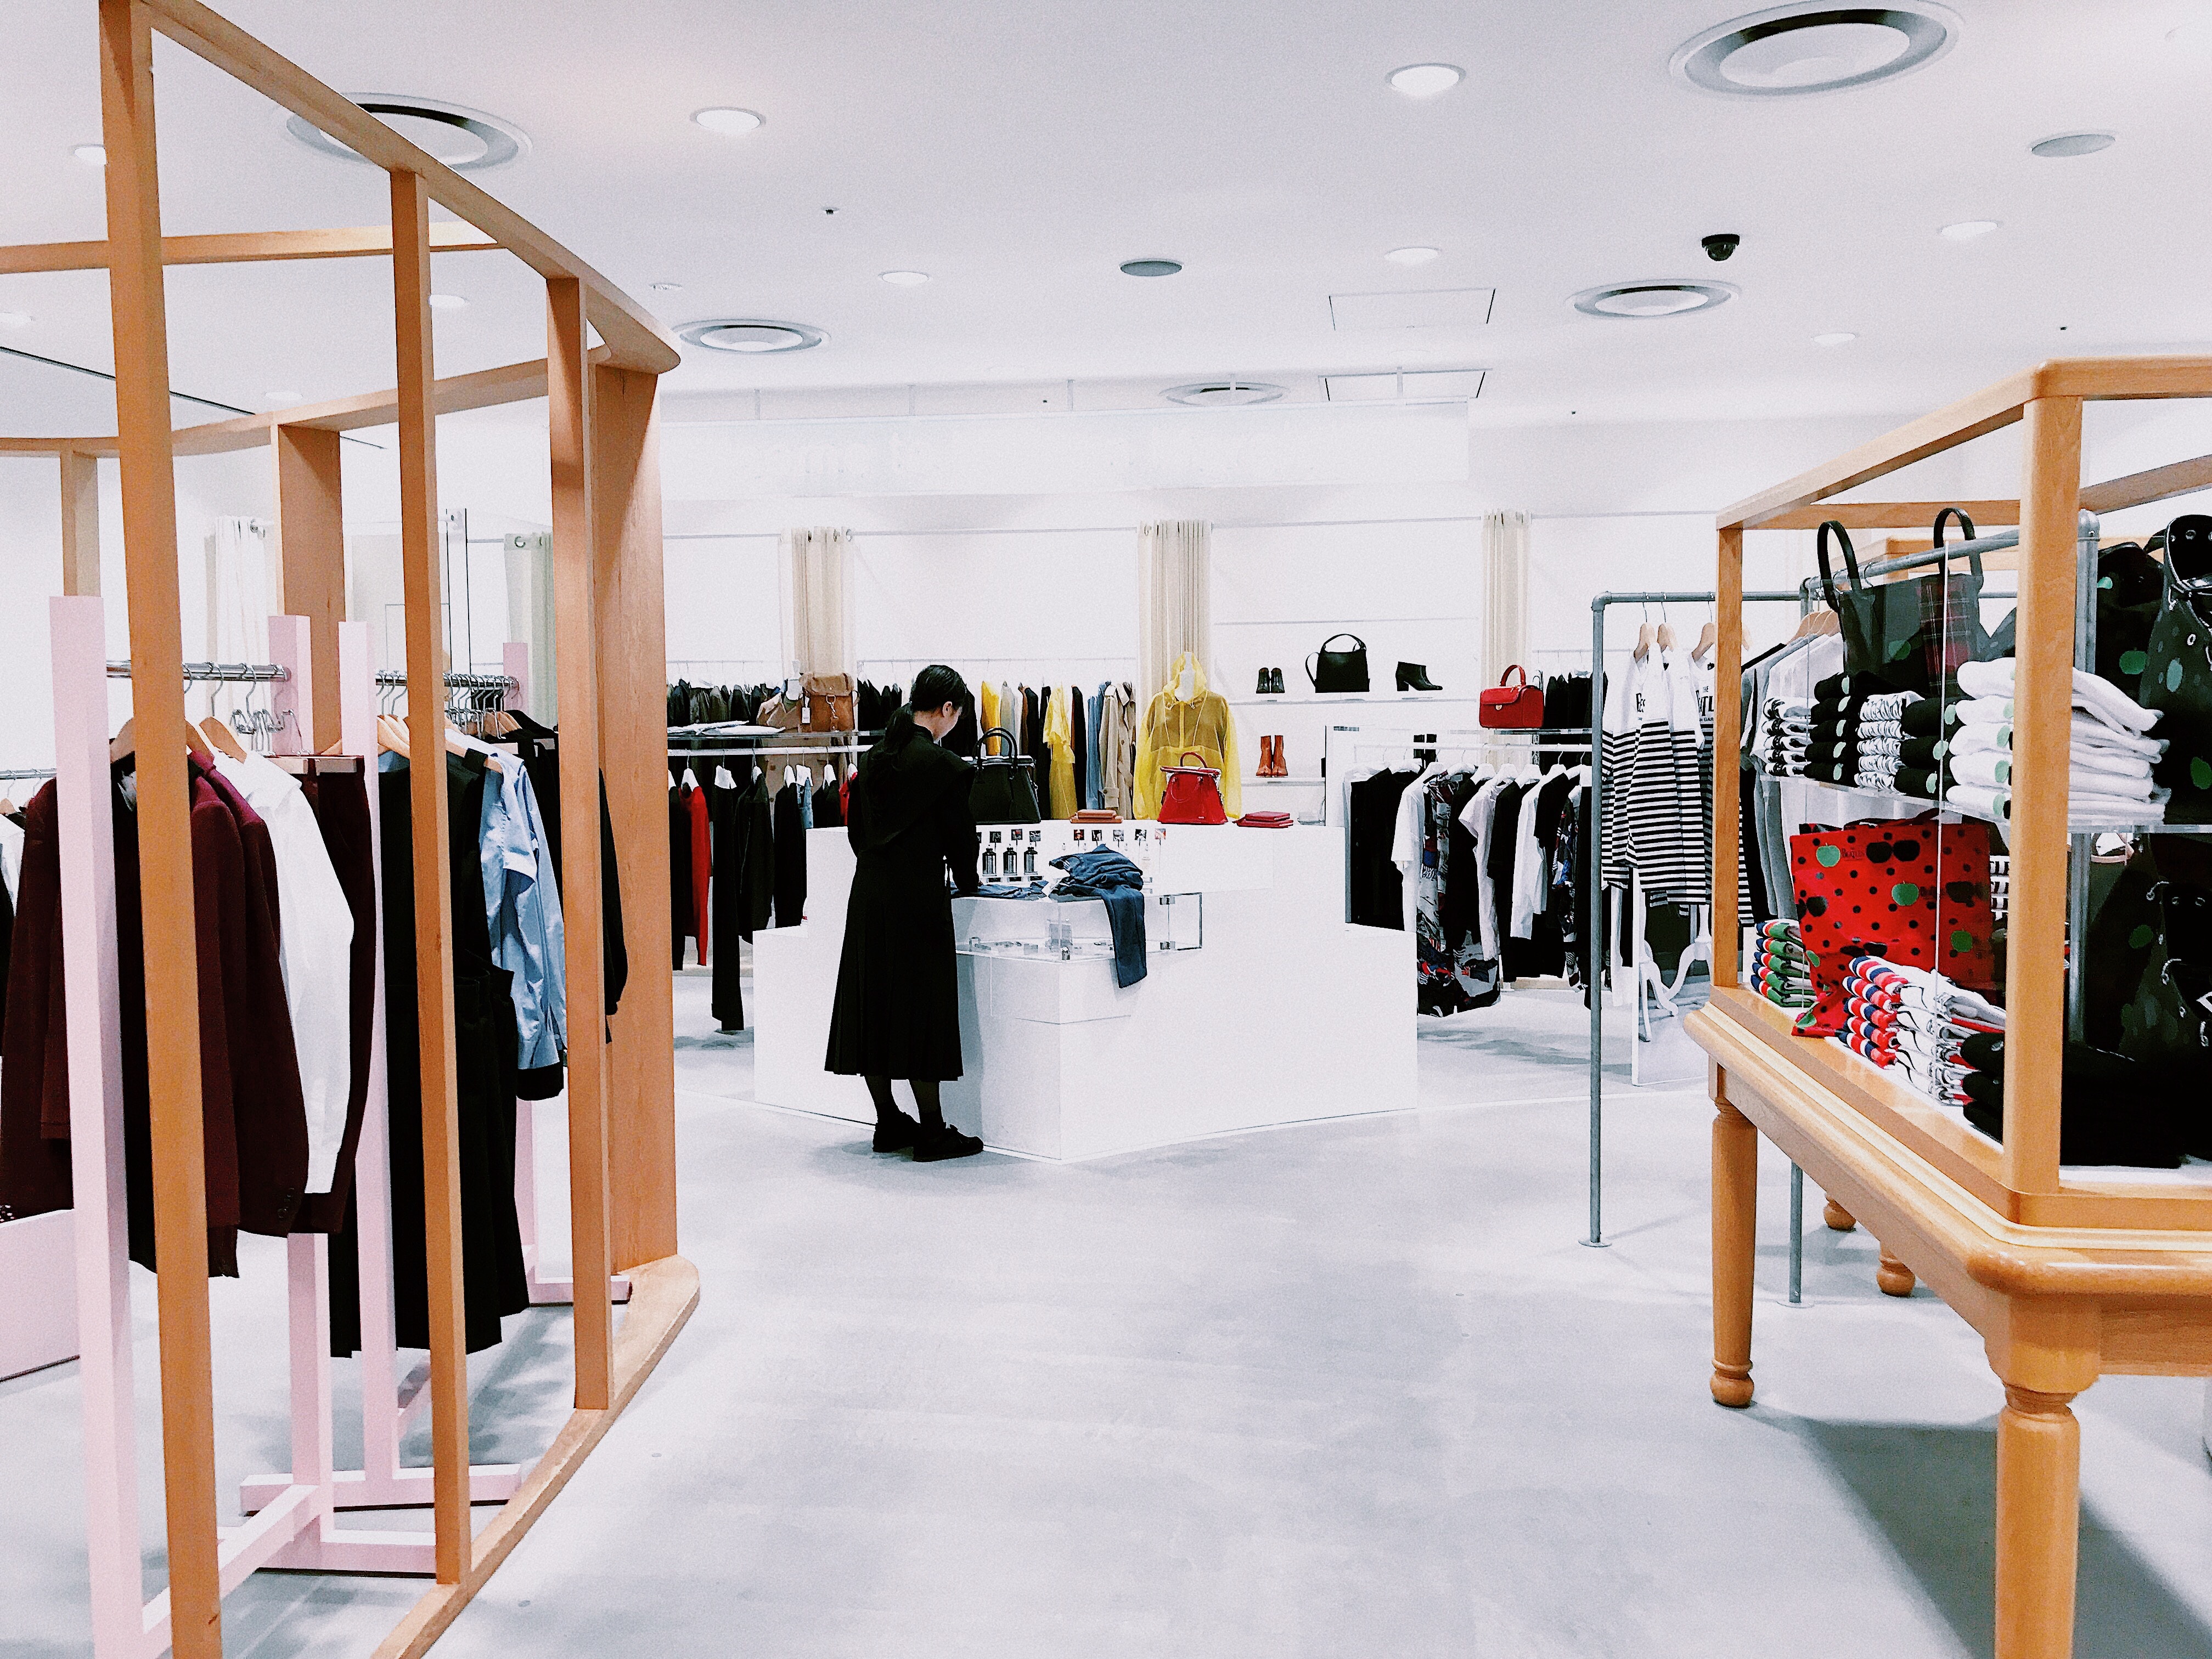 How to use minimalism in retail design